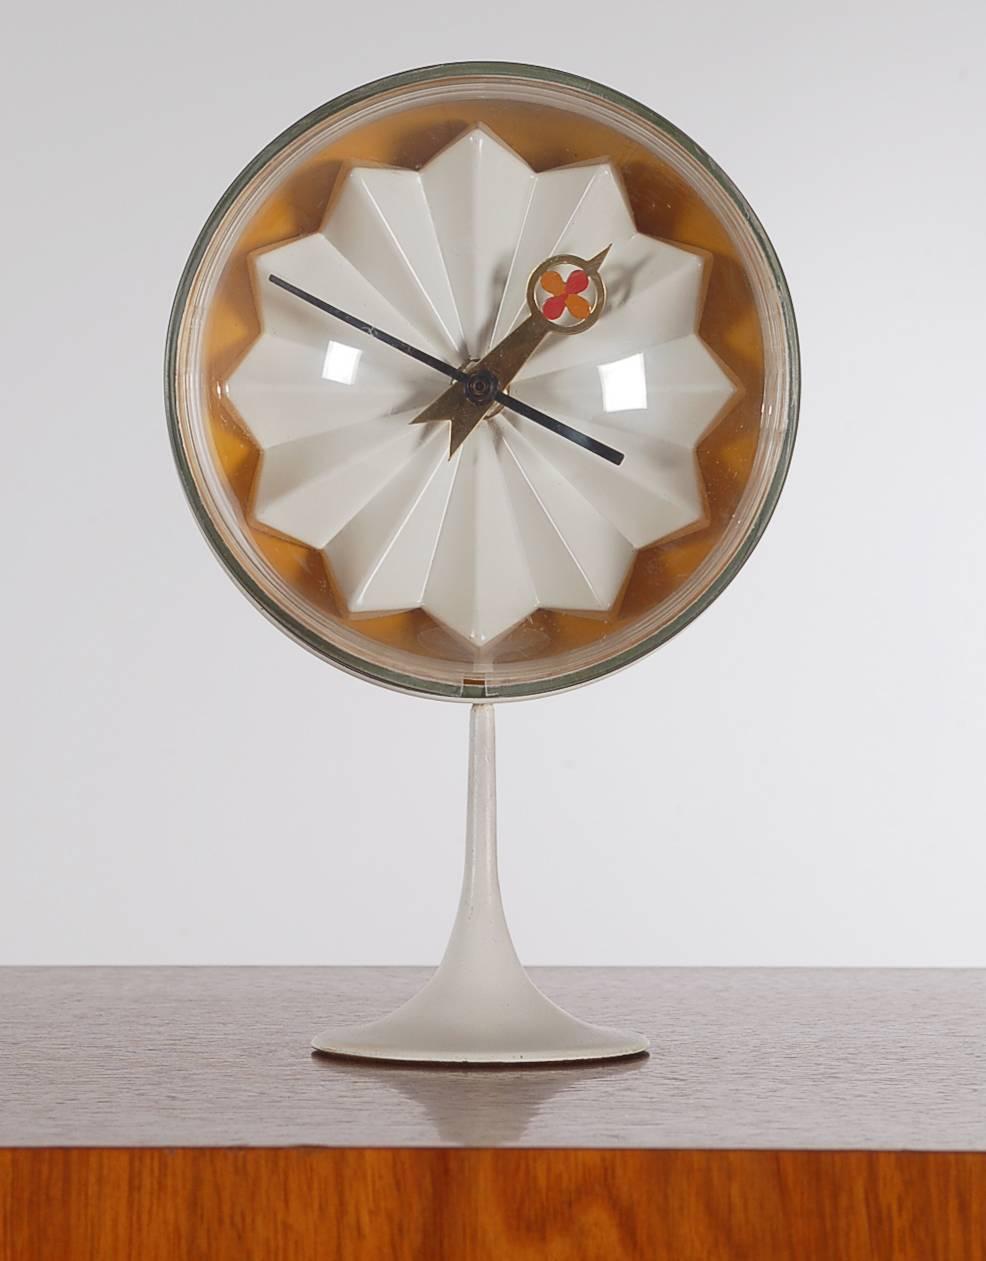 A fine tulip base pedestal clock designed by George Nelson and manufactured by Howard Miller clock company. Heavy well-made steel construction with a bubble front lens. Original 